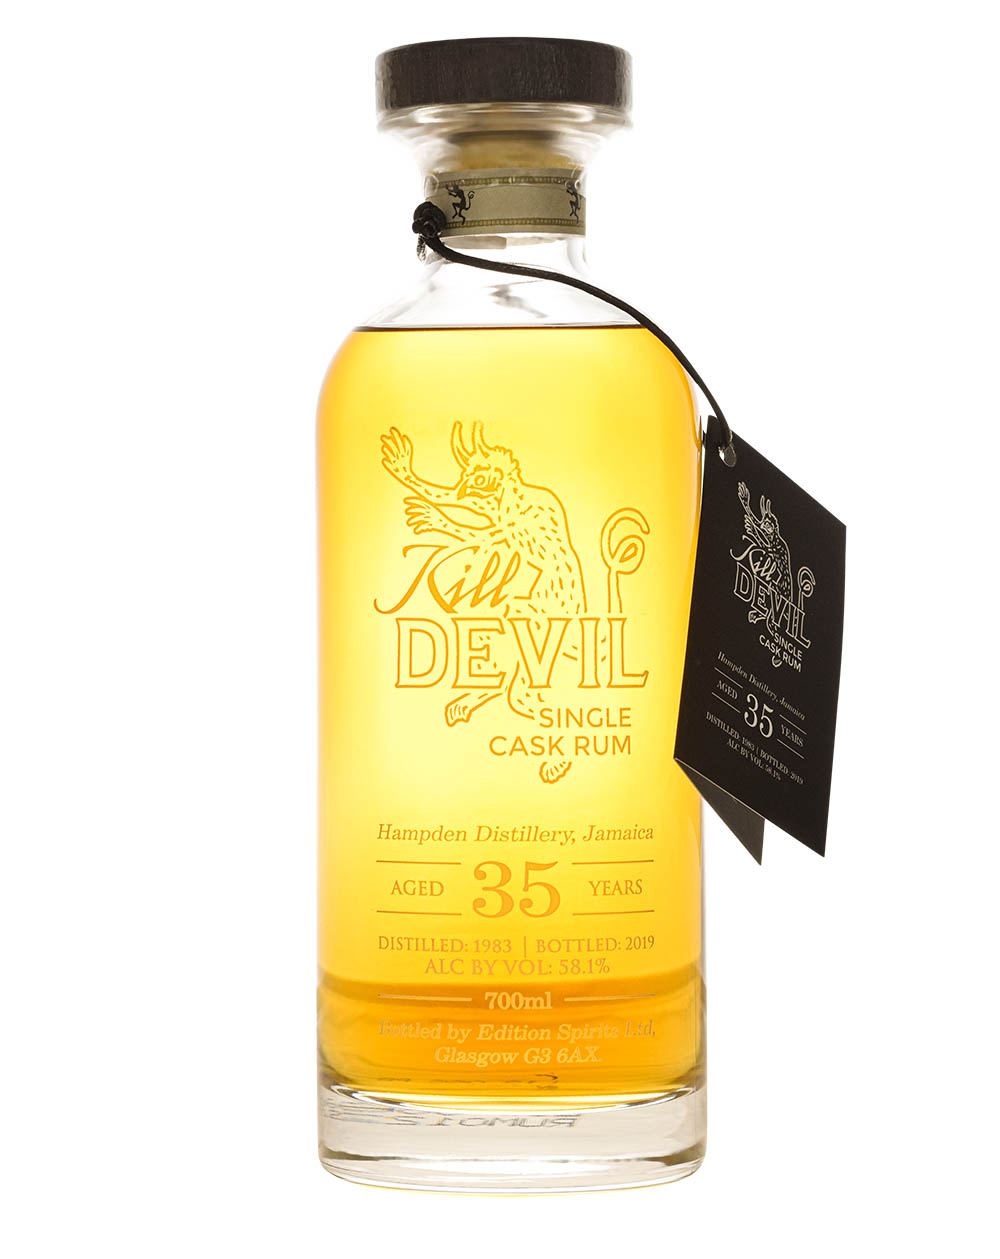 Hampden Kill Devil 35 Years Old Single Cask Rum Musthave Malts MHM